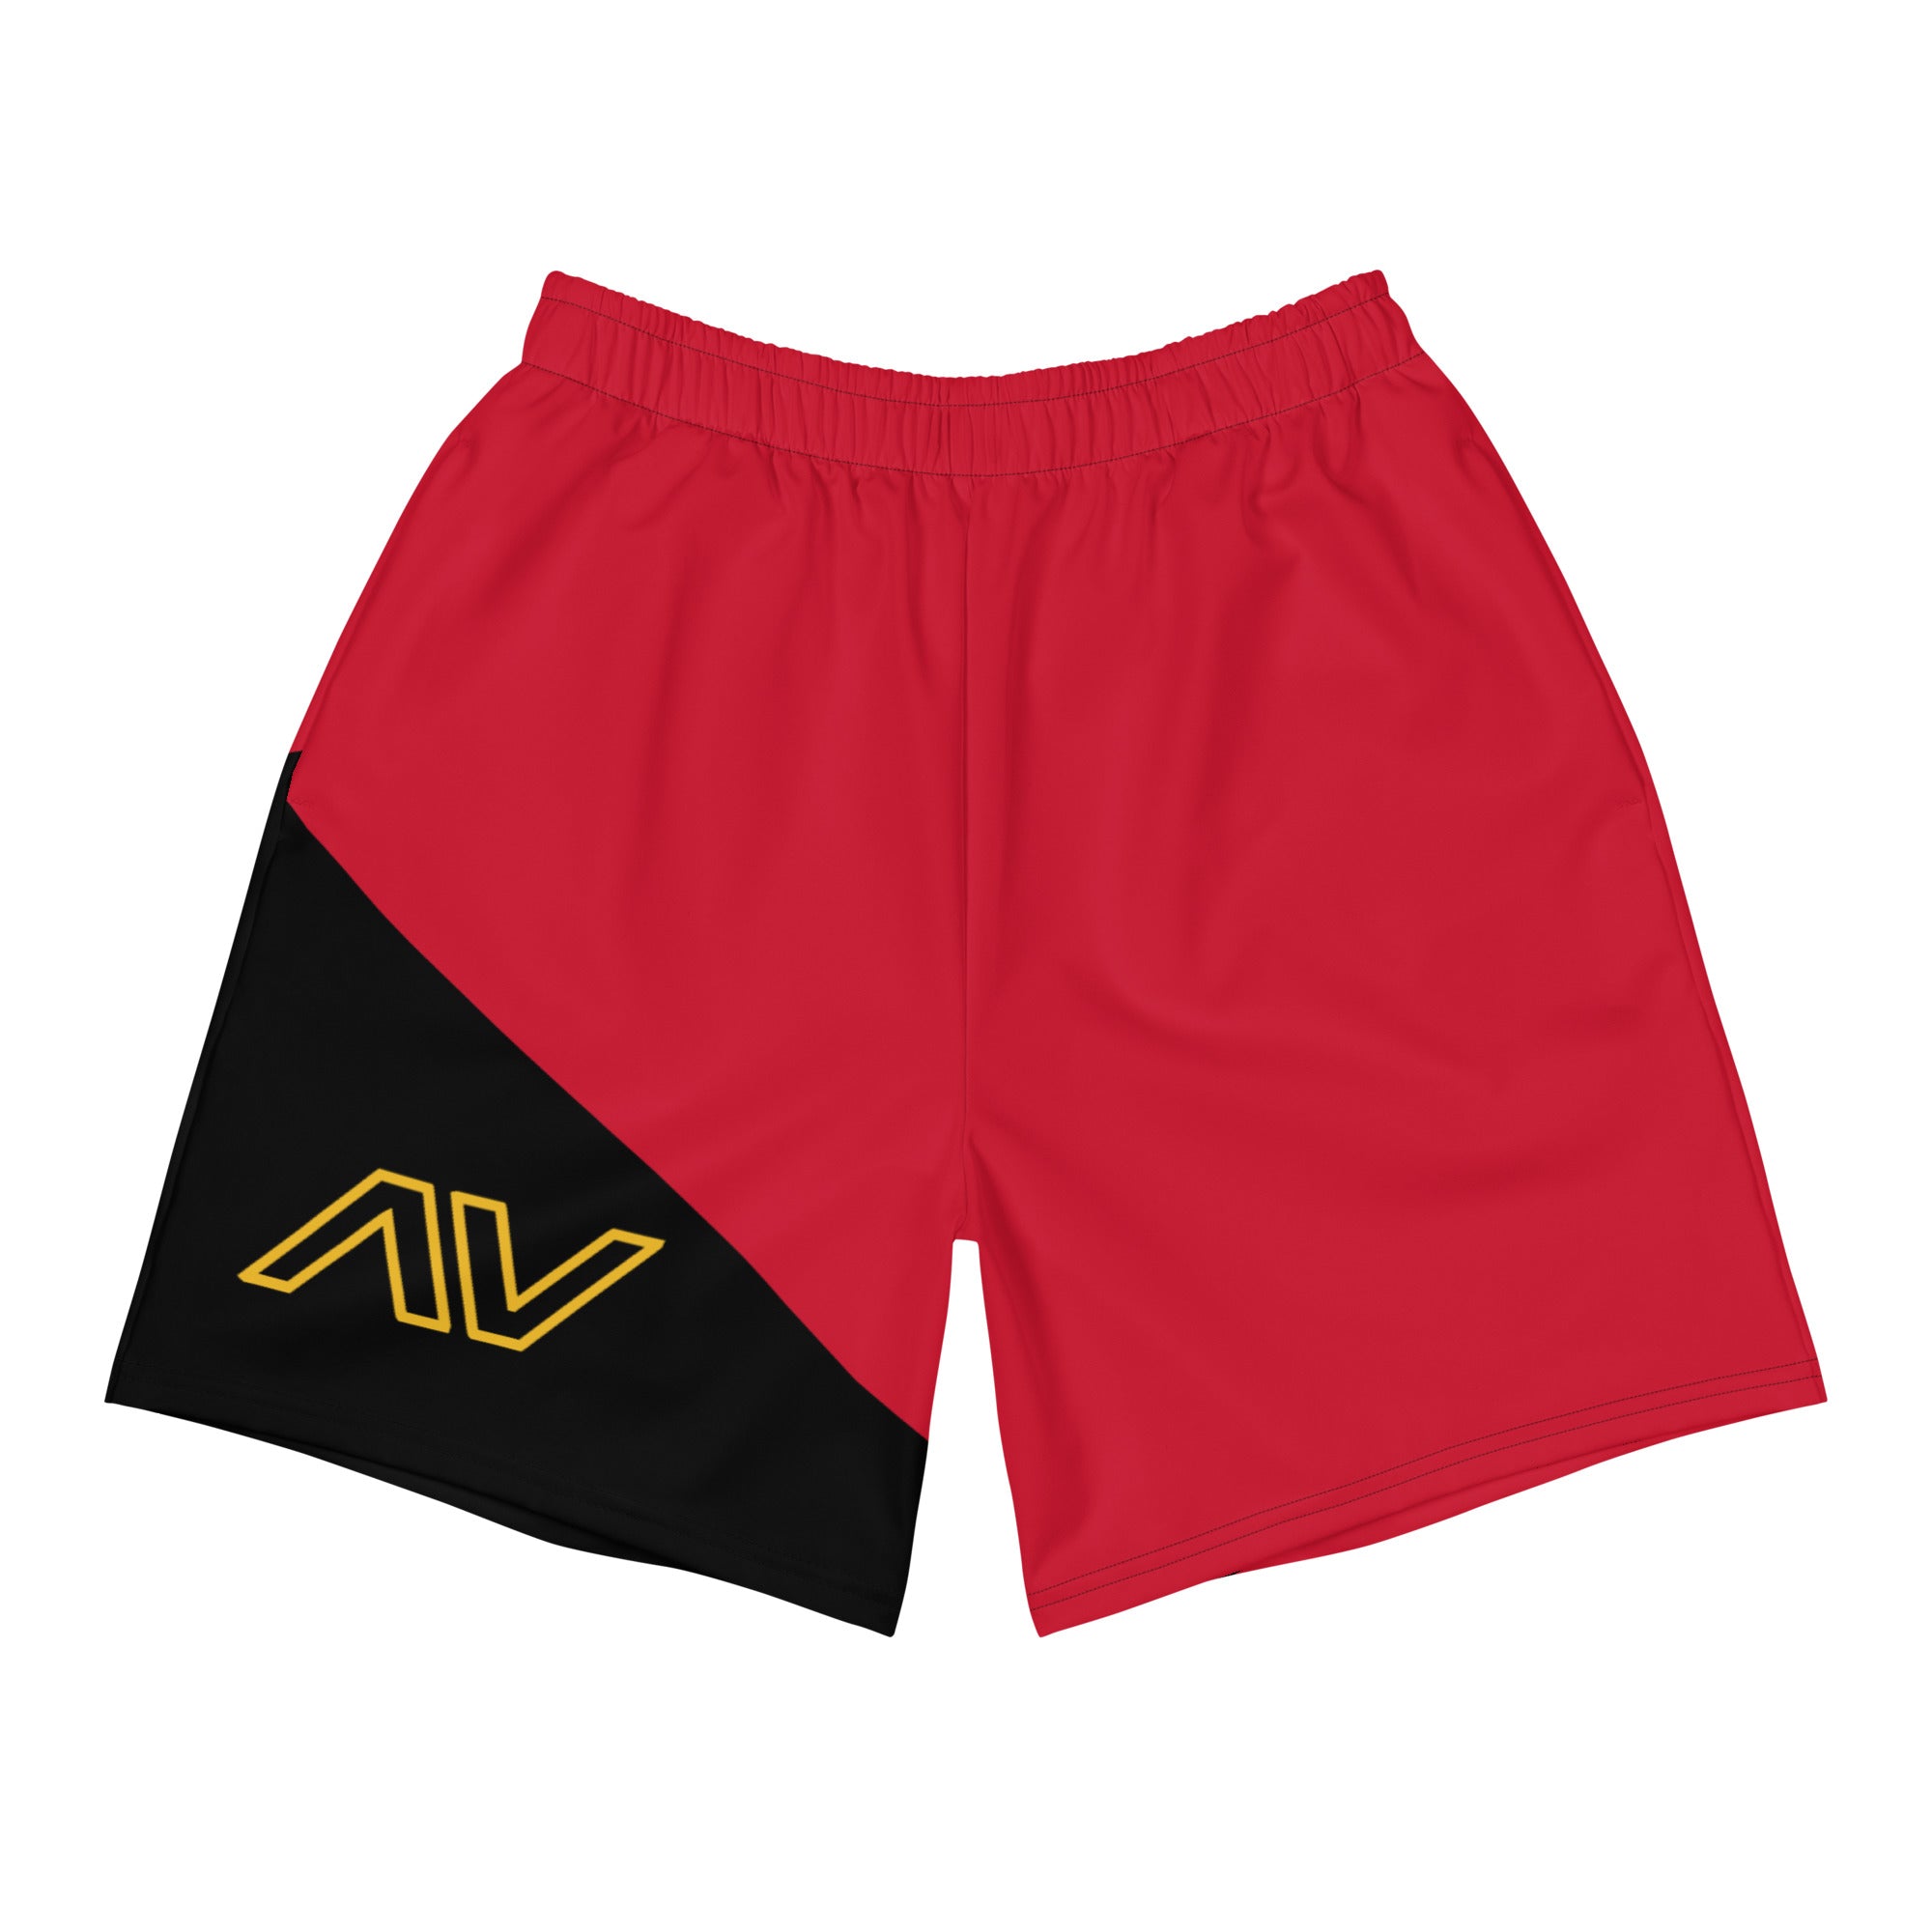 Men's Red Athletic Shorts